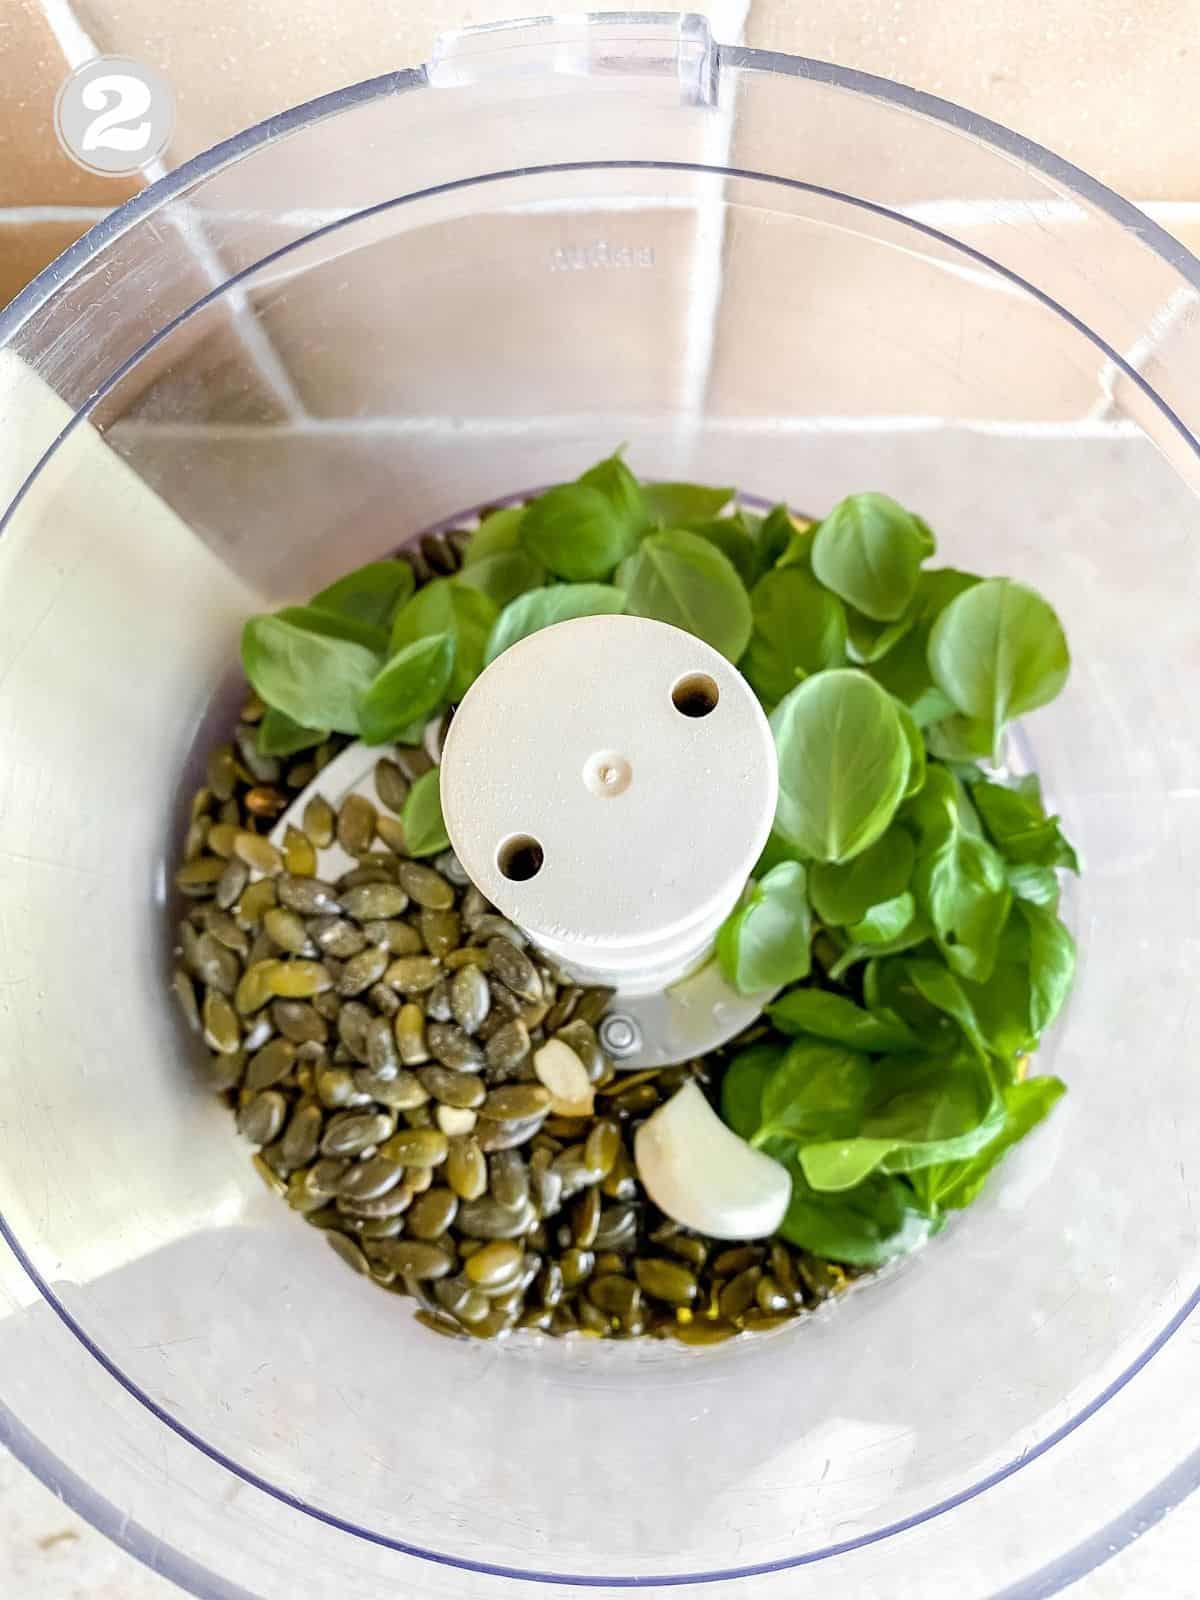 pumpkin seeds, garlic and basil leaves in a food processor.